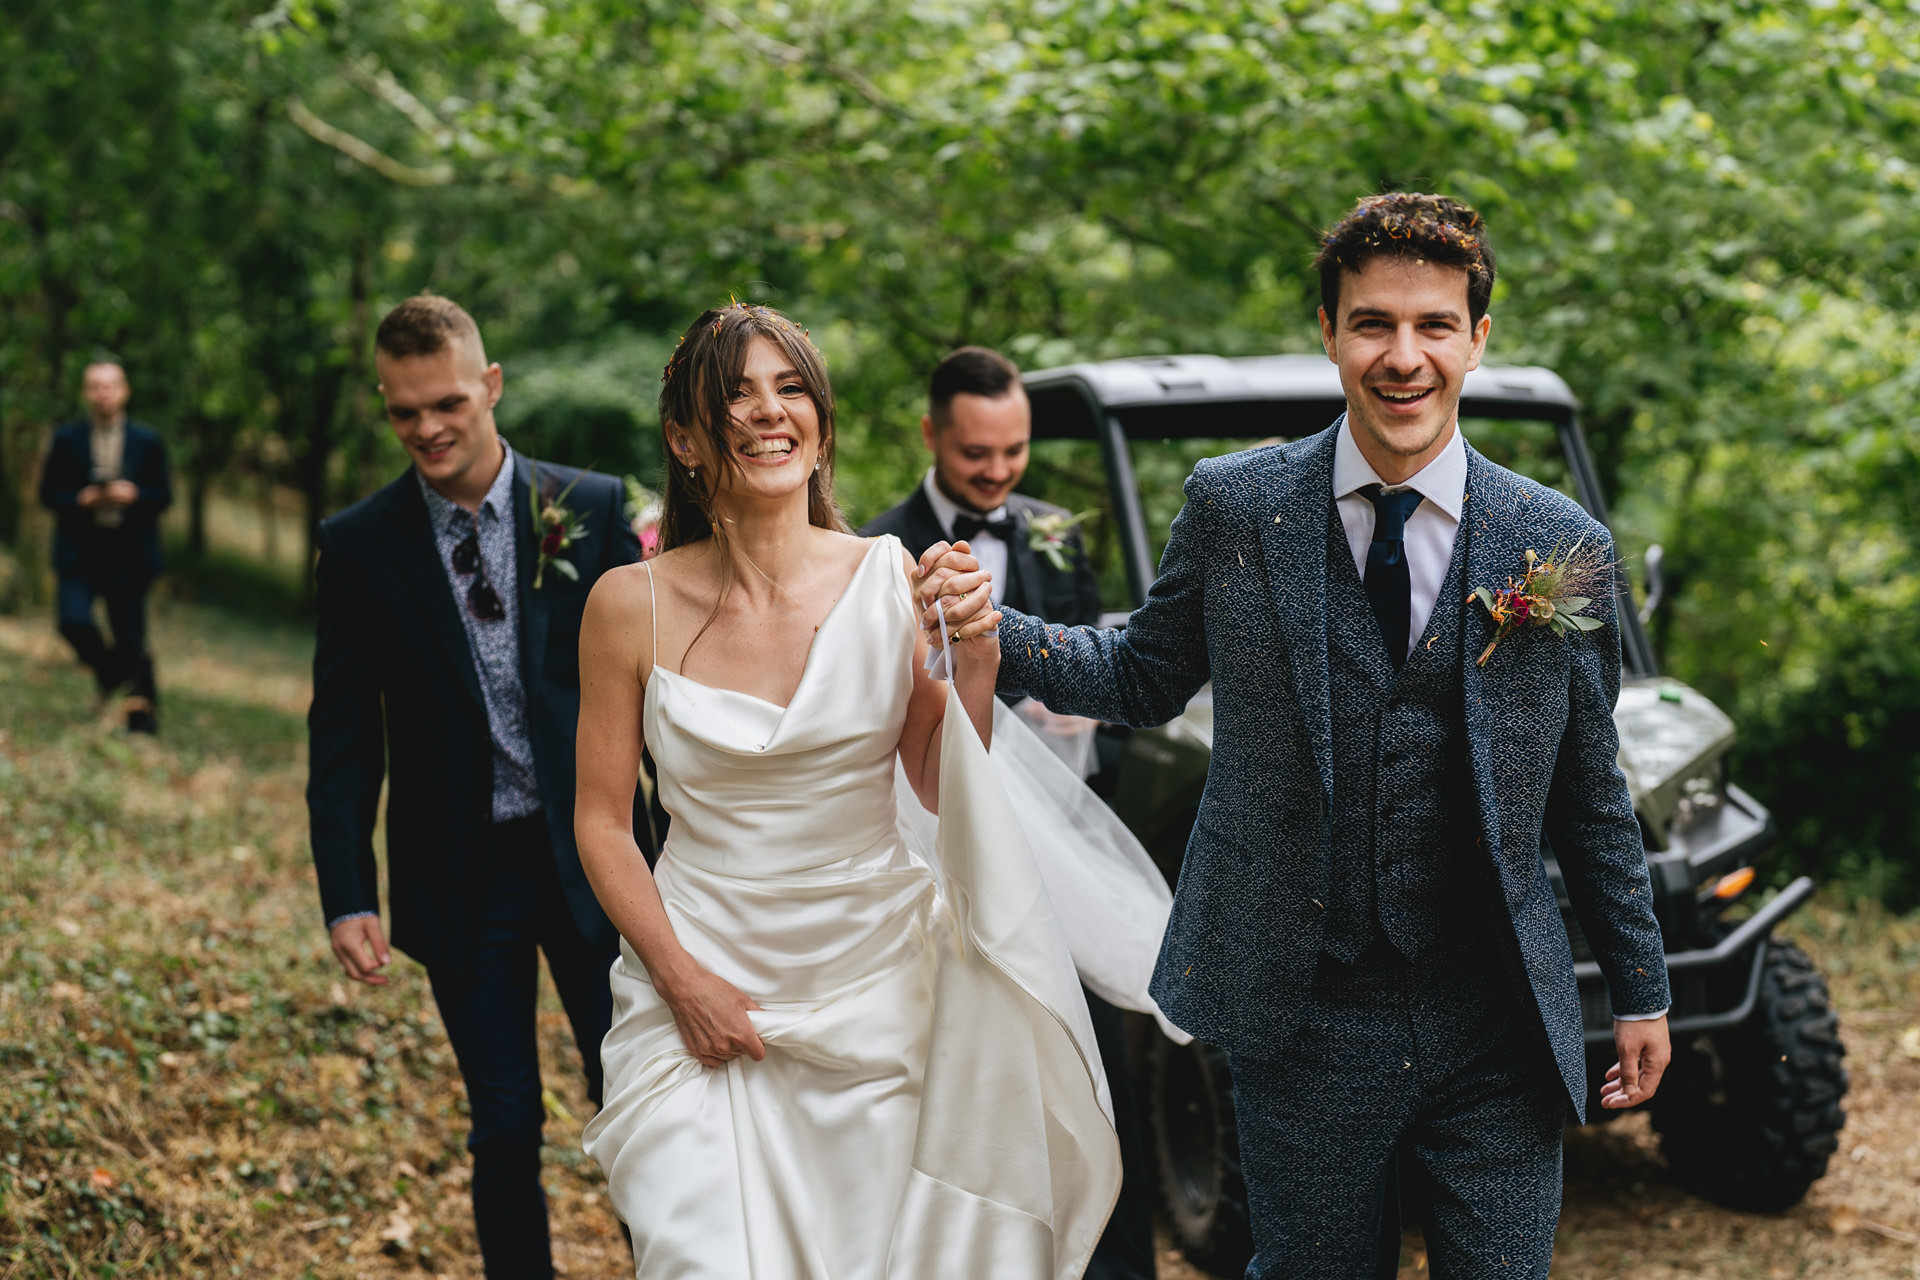 A bride in Vivienne Westwood and groom in a bespoke Casely Hayford suit walking through the woodland on Dartmoor together